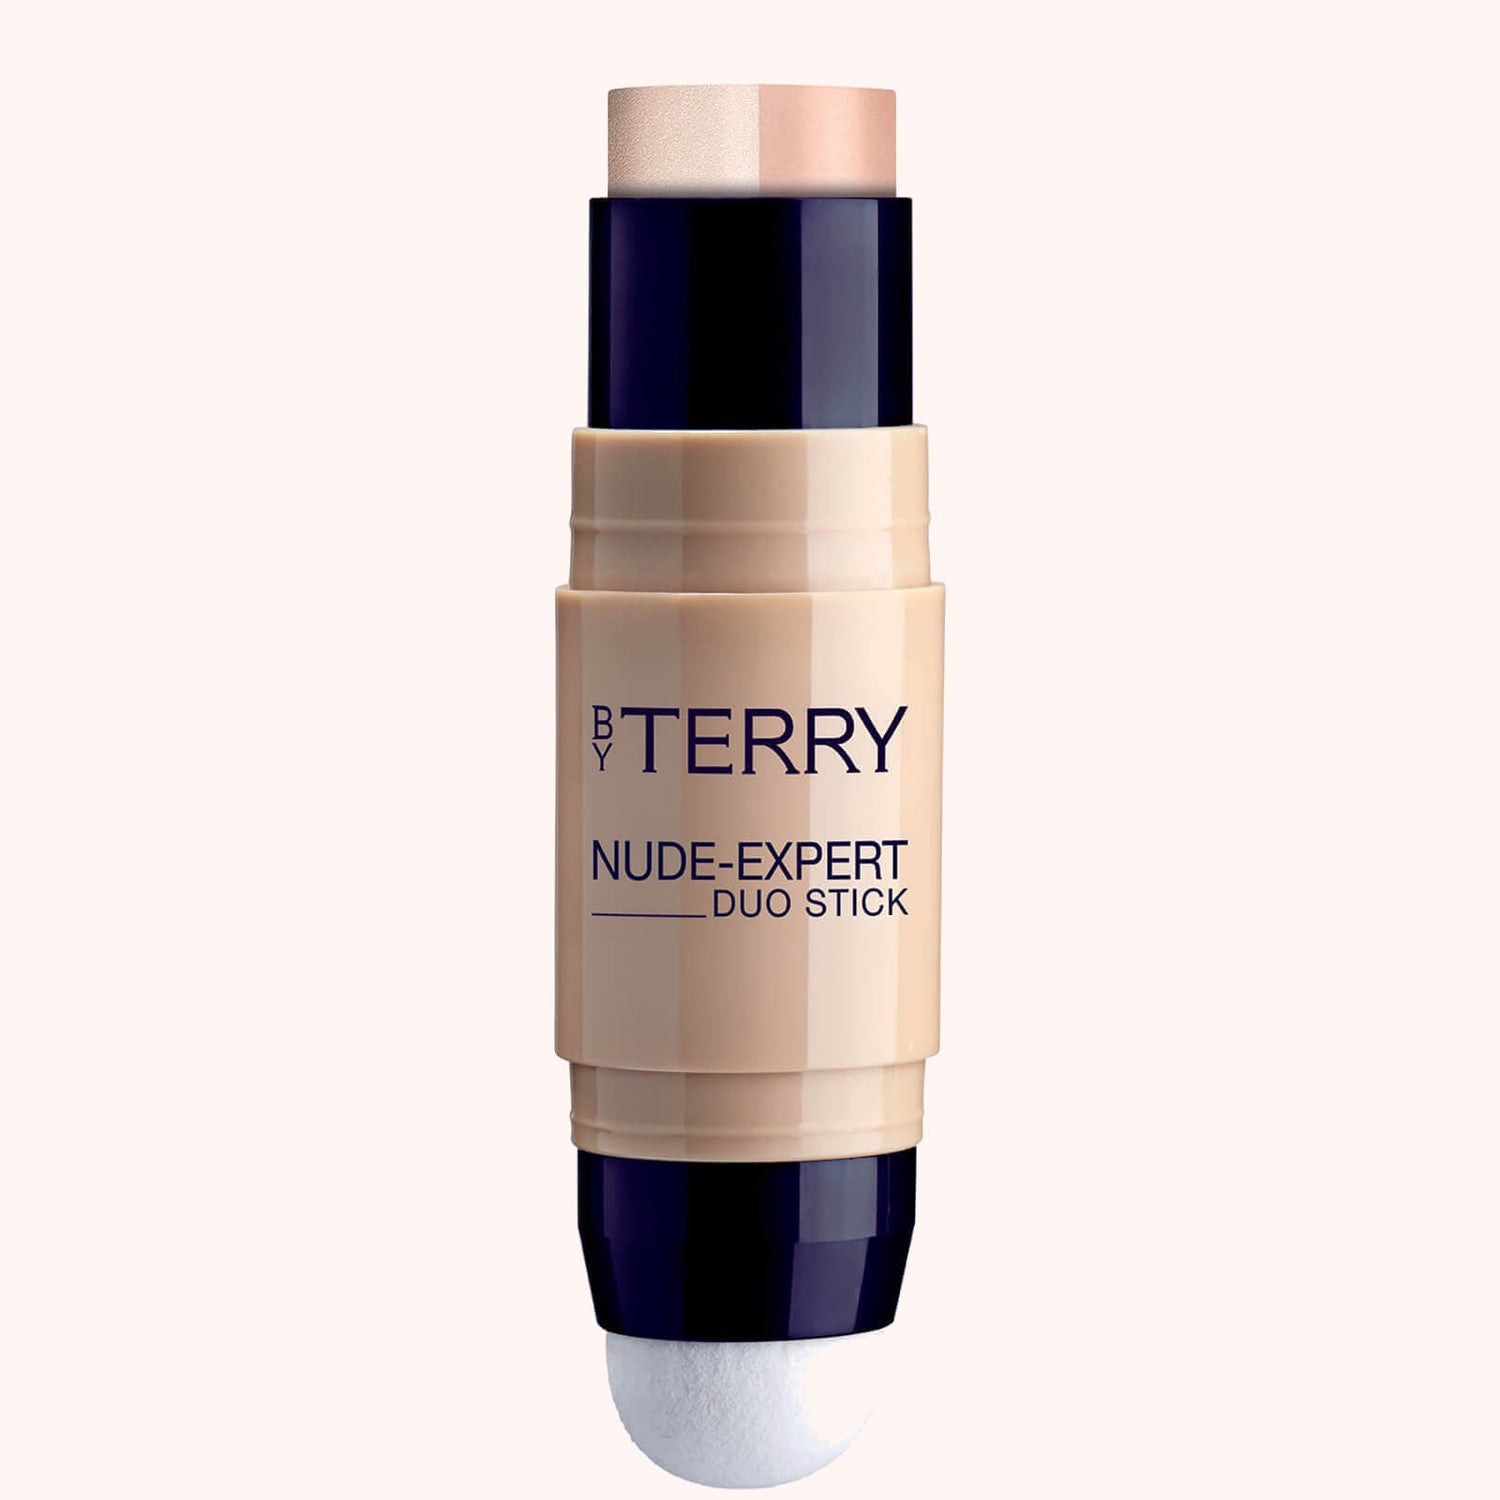 By Terry Nude-Expert Duo Stick (0.3 oz.)